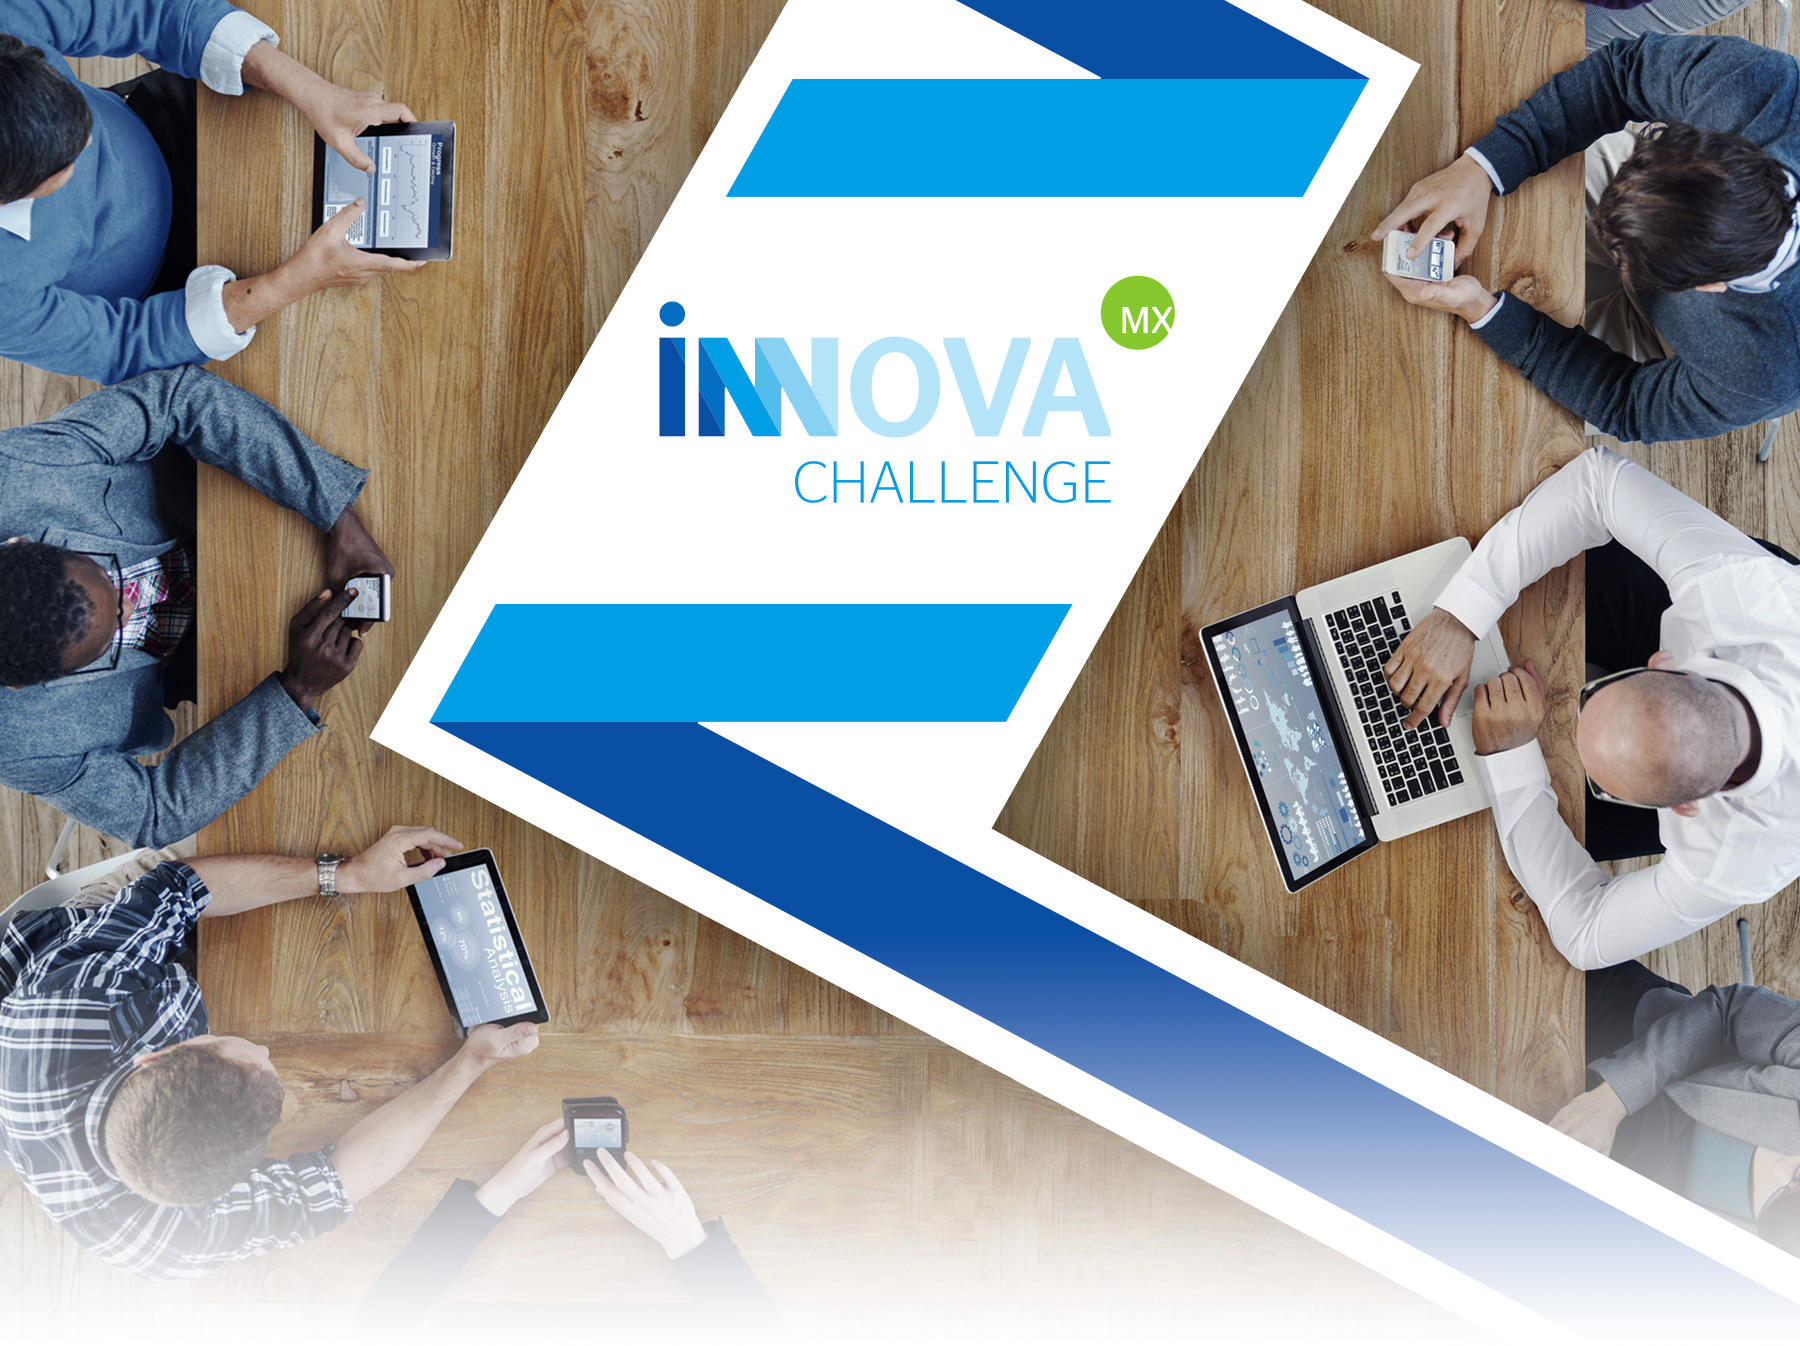 Upload your project, last week until the end of InnovaChallenge MX!